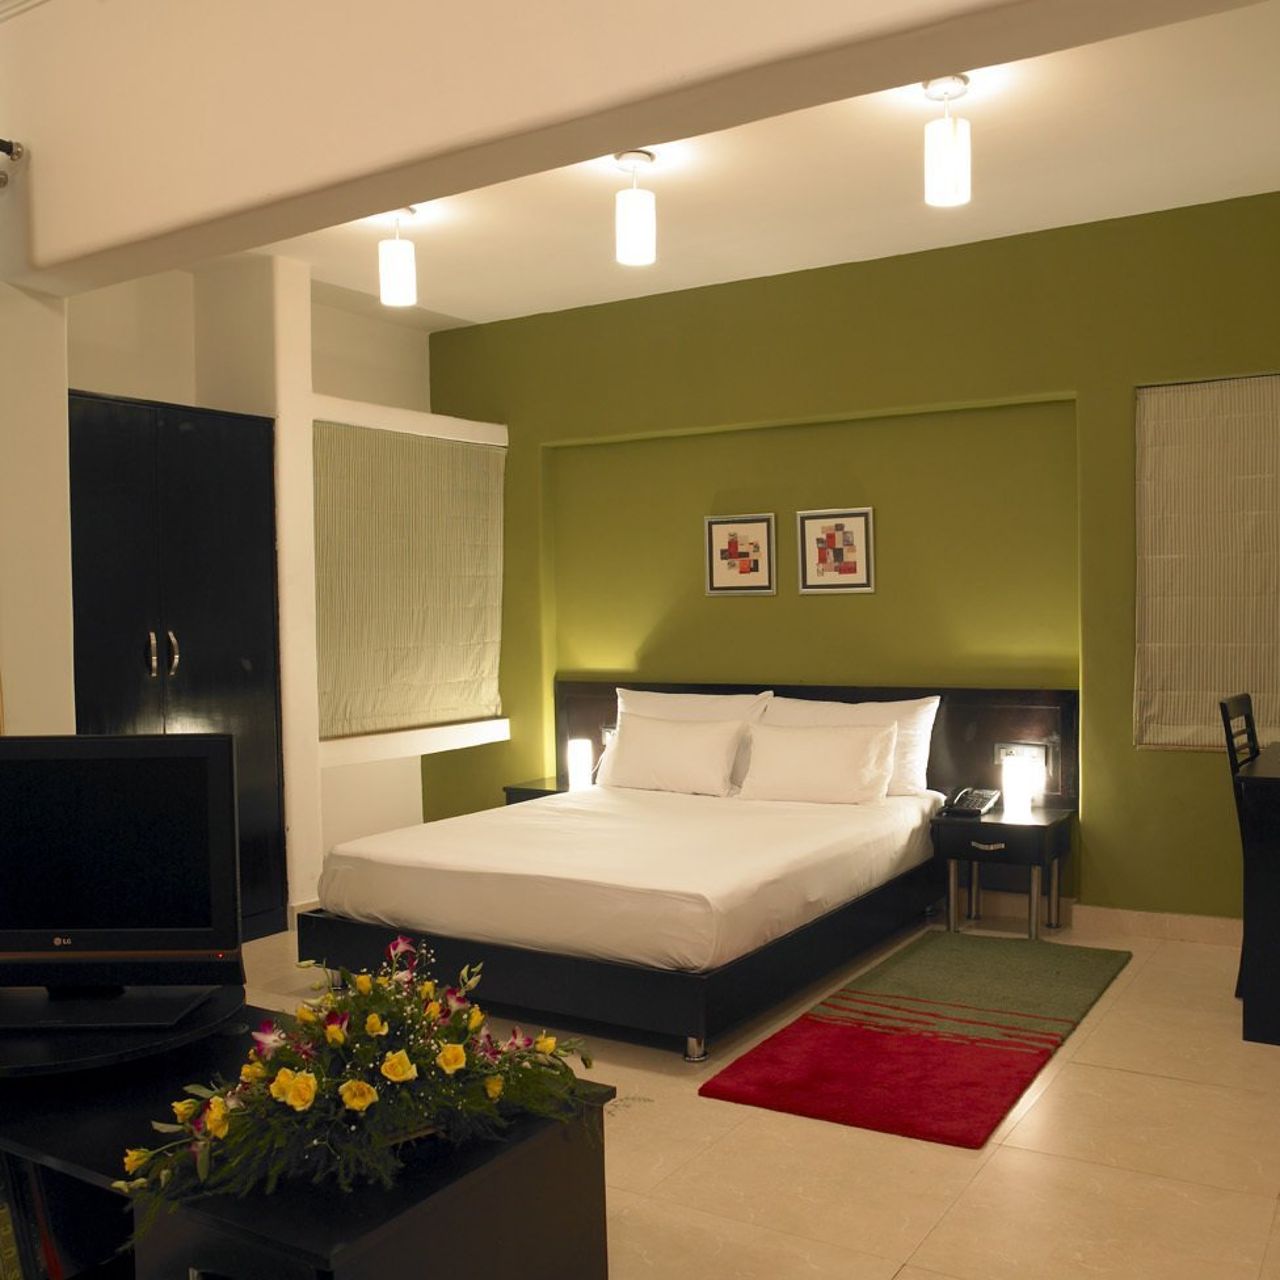 Budget Hotels in Pune | Accommodation in Pune Hotels Royal Orchid Hotels